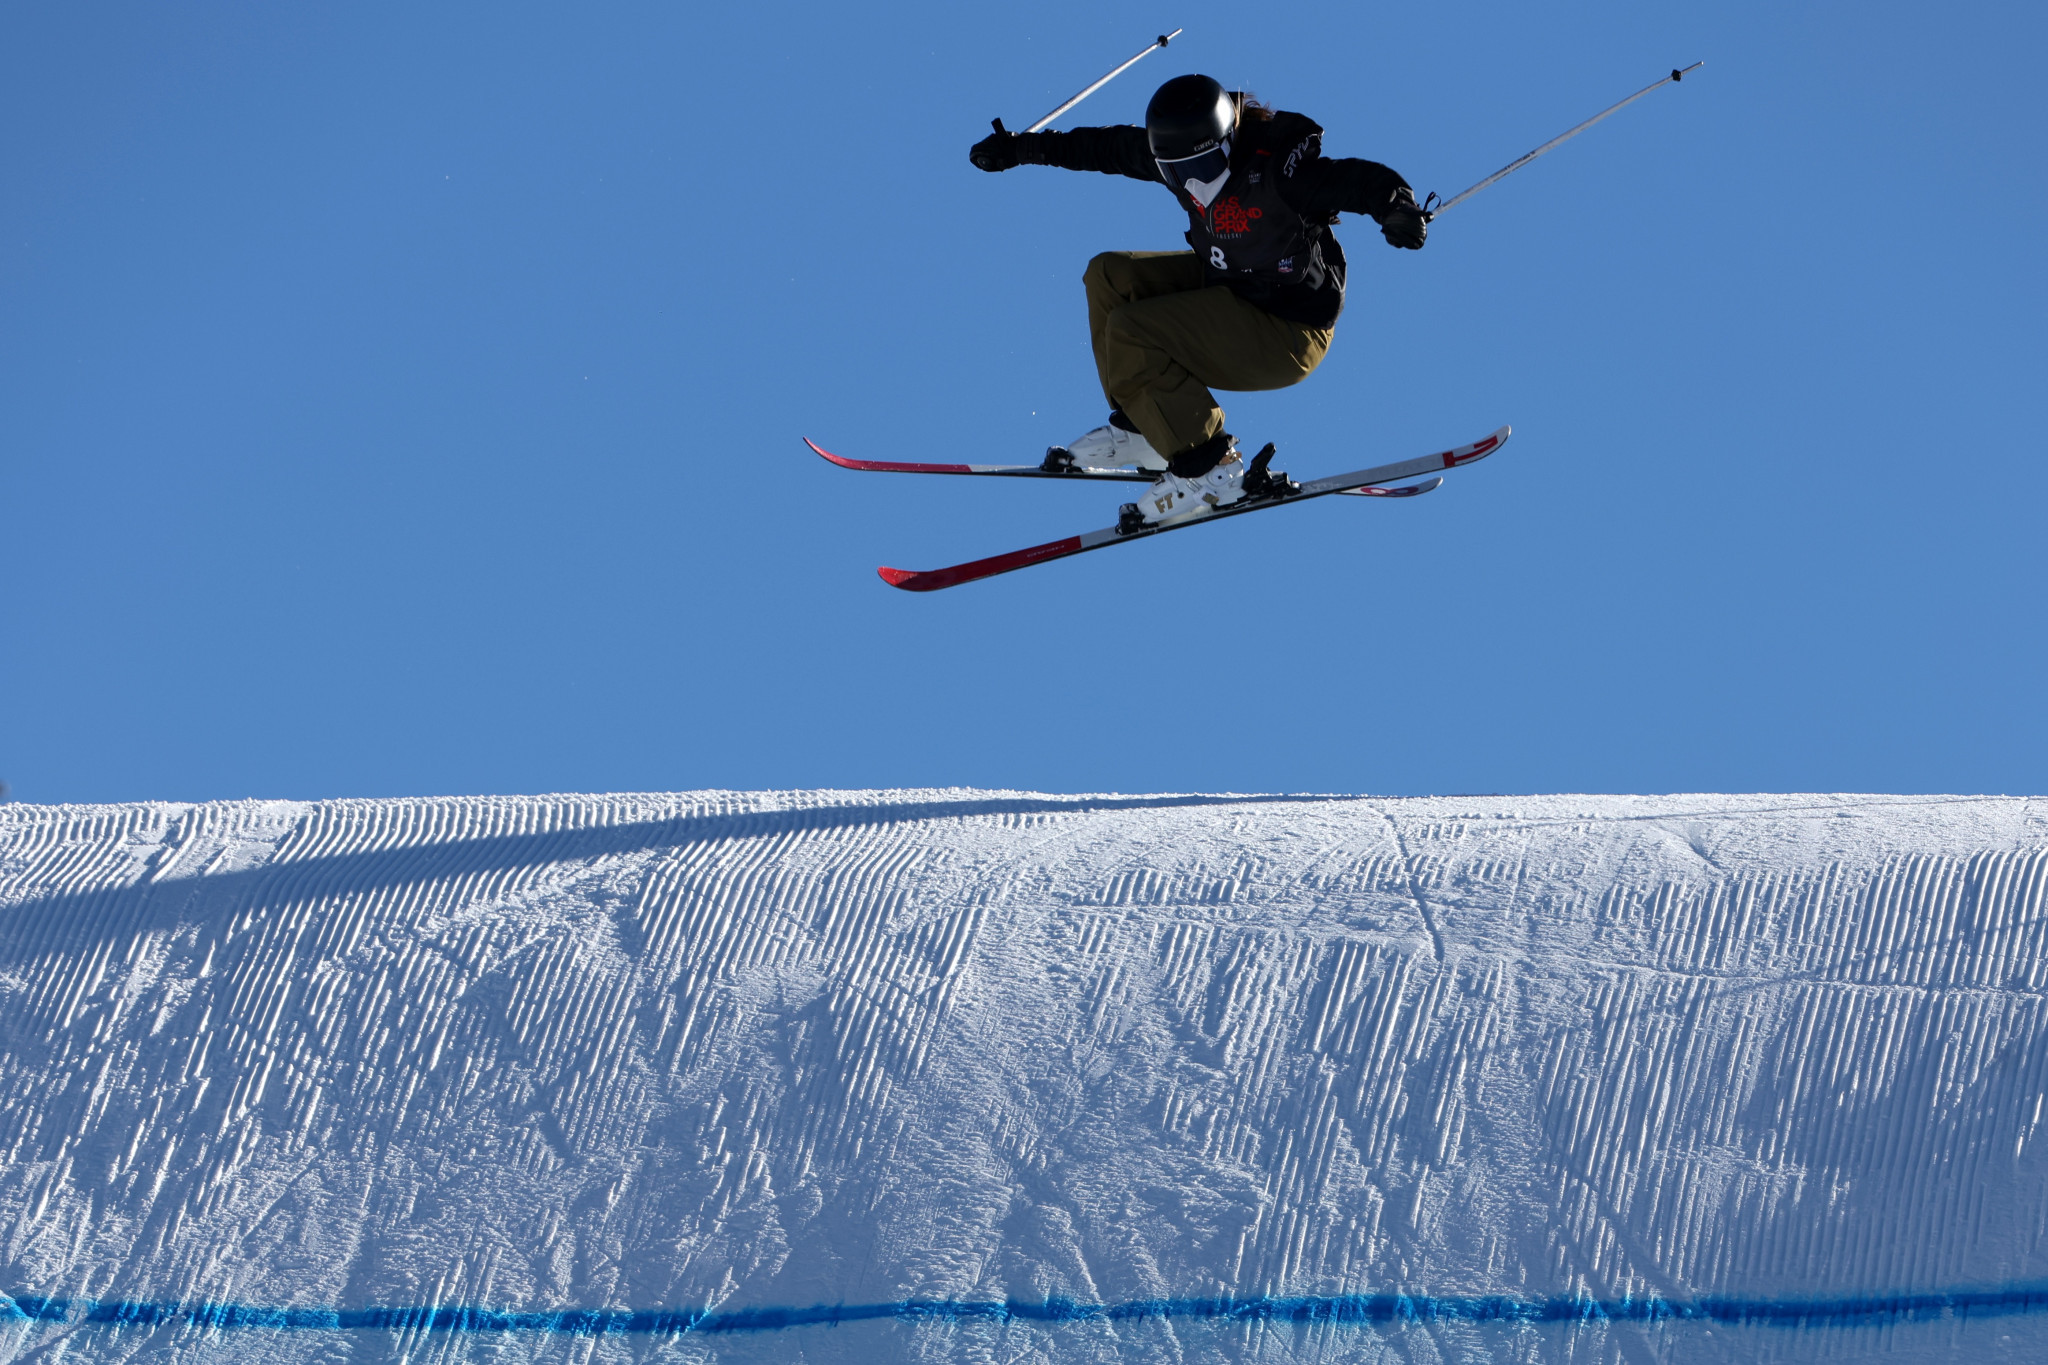 Slopestyle was one of the events held in Zhangjiakou ©Getty Images